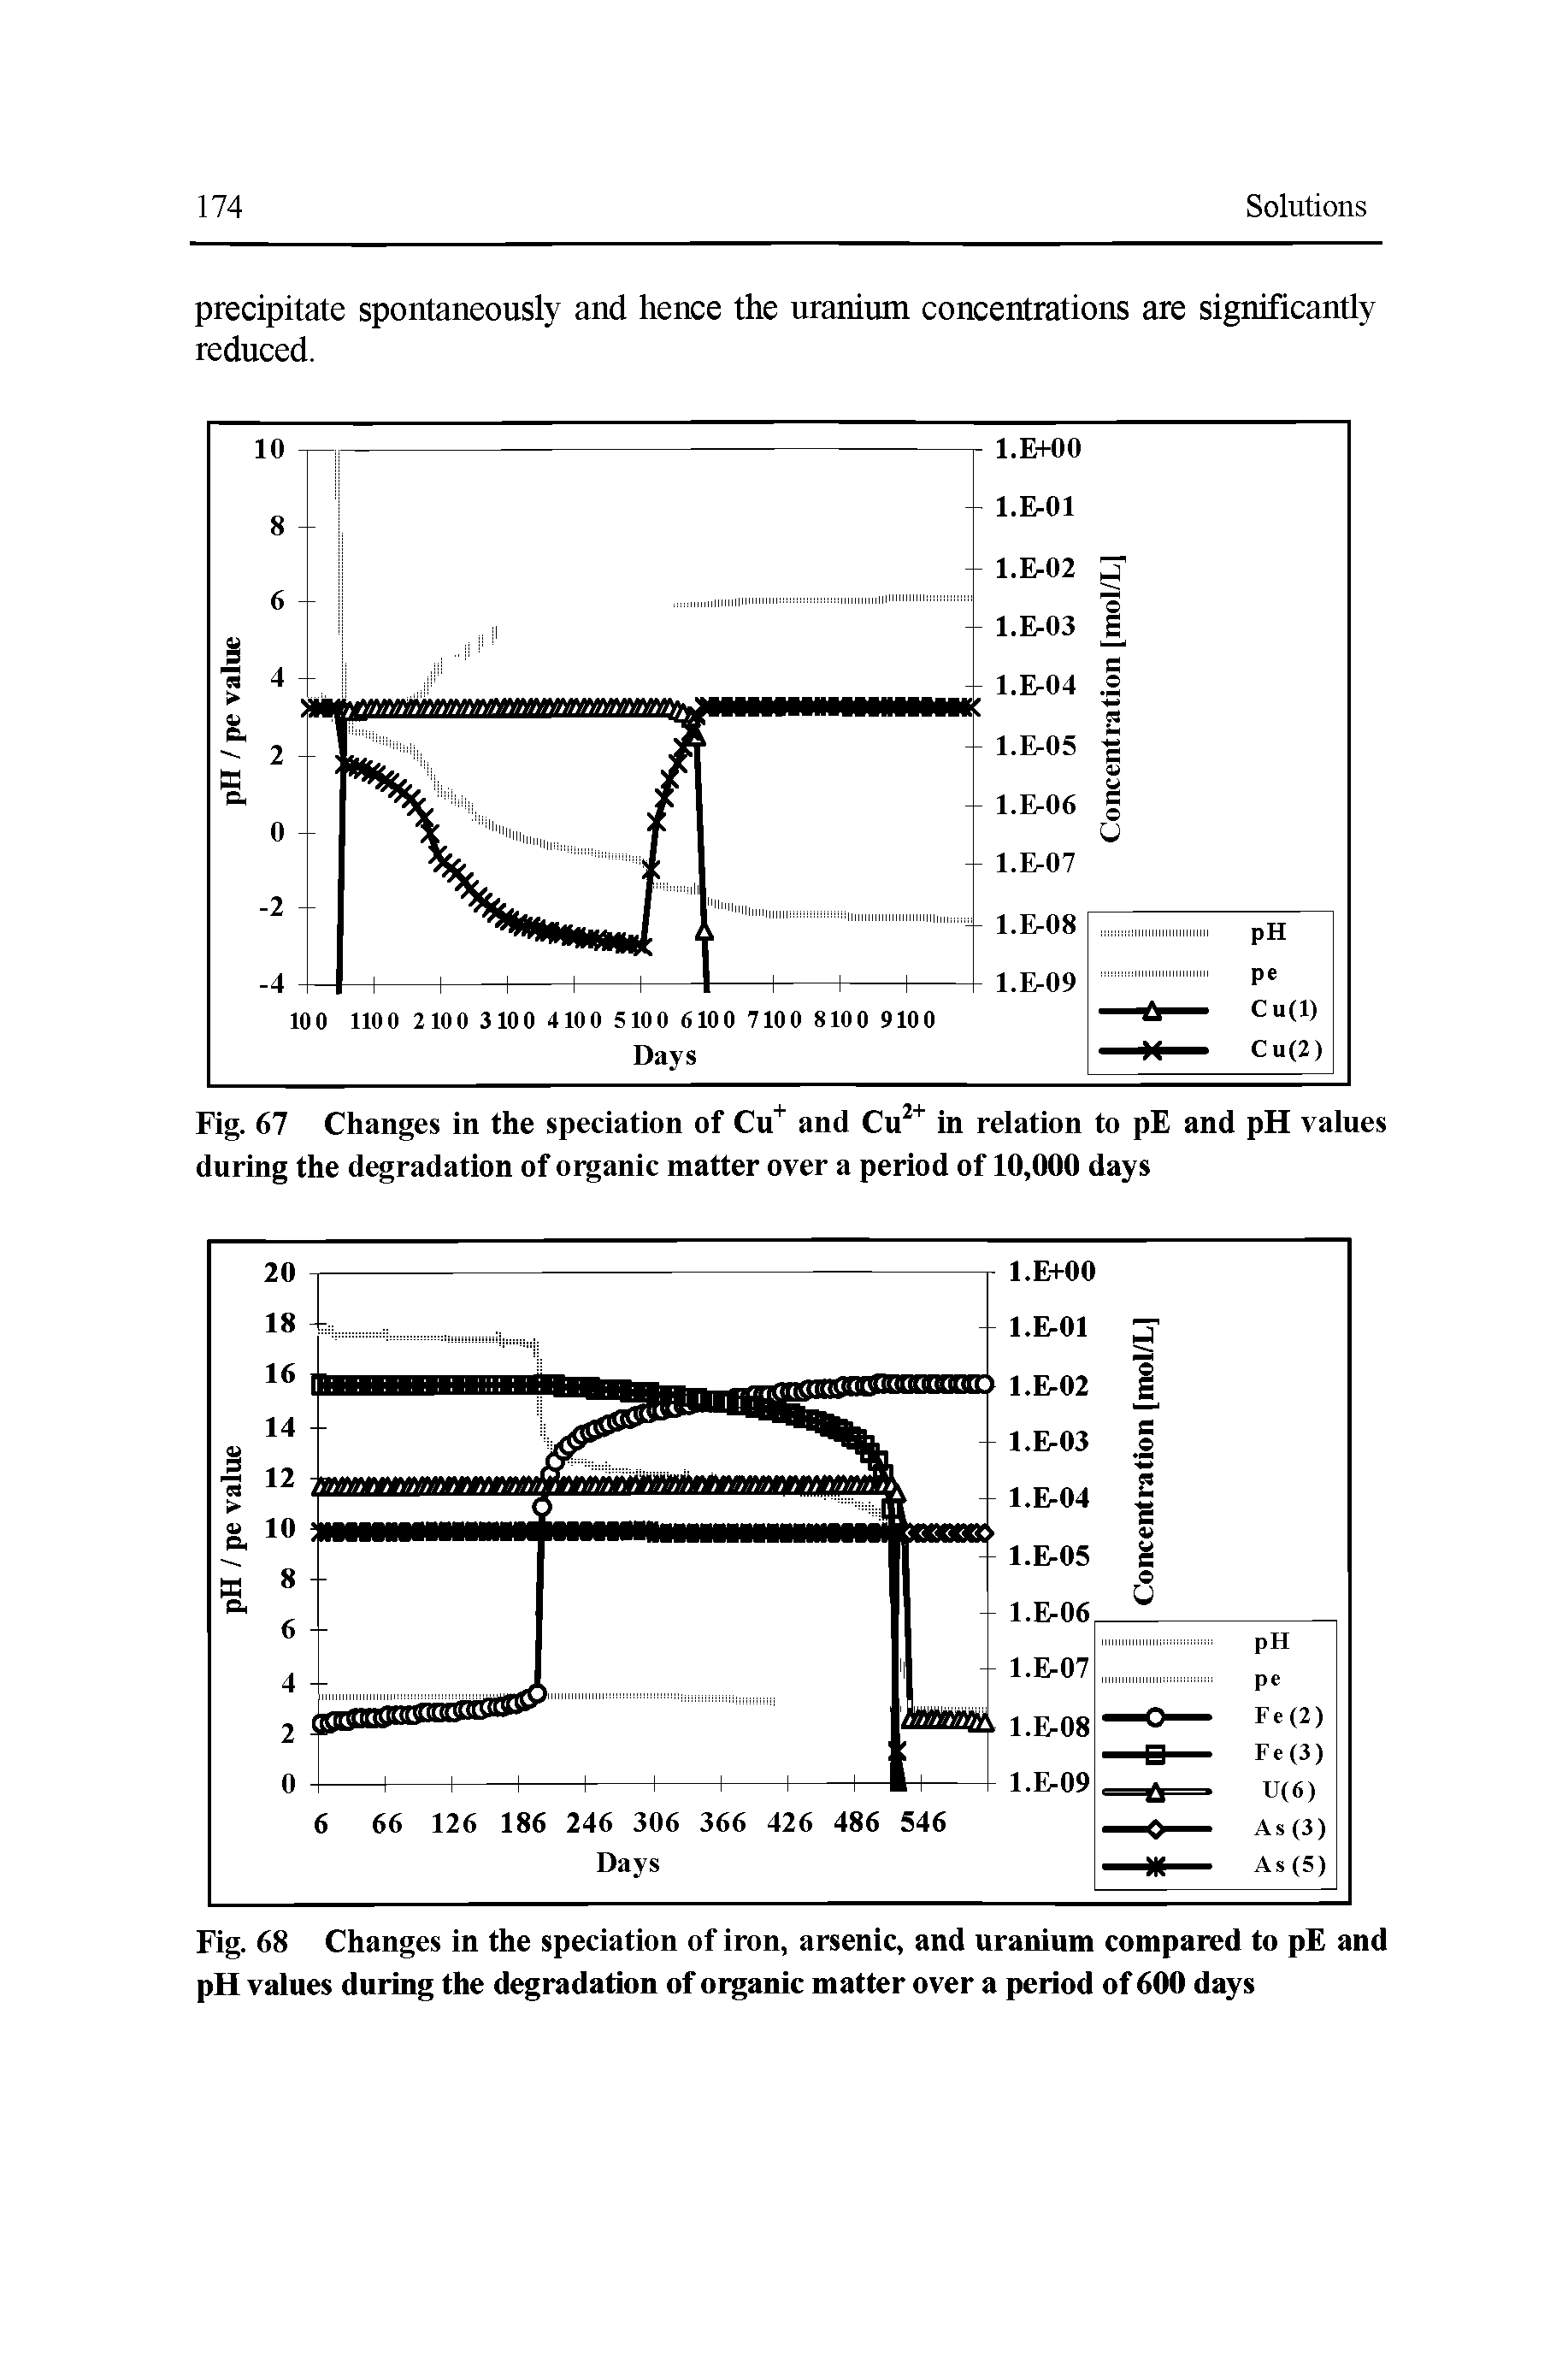 Fig. 68 Changes in the speciation of iron, arsenic, and uranium compared to pE and pH values during the degradation of organic matter over a period of600 days...